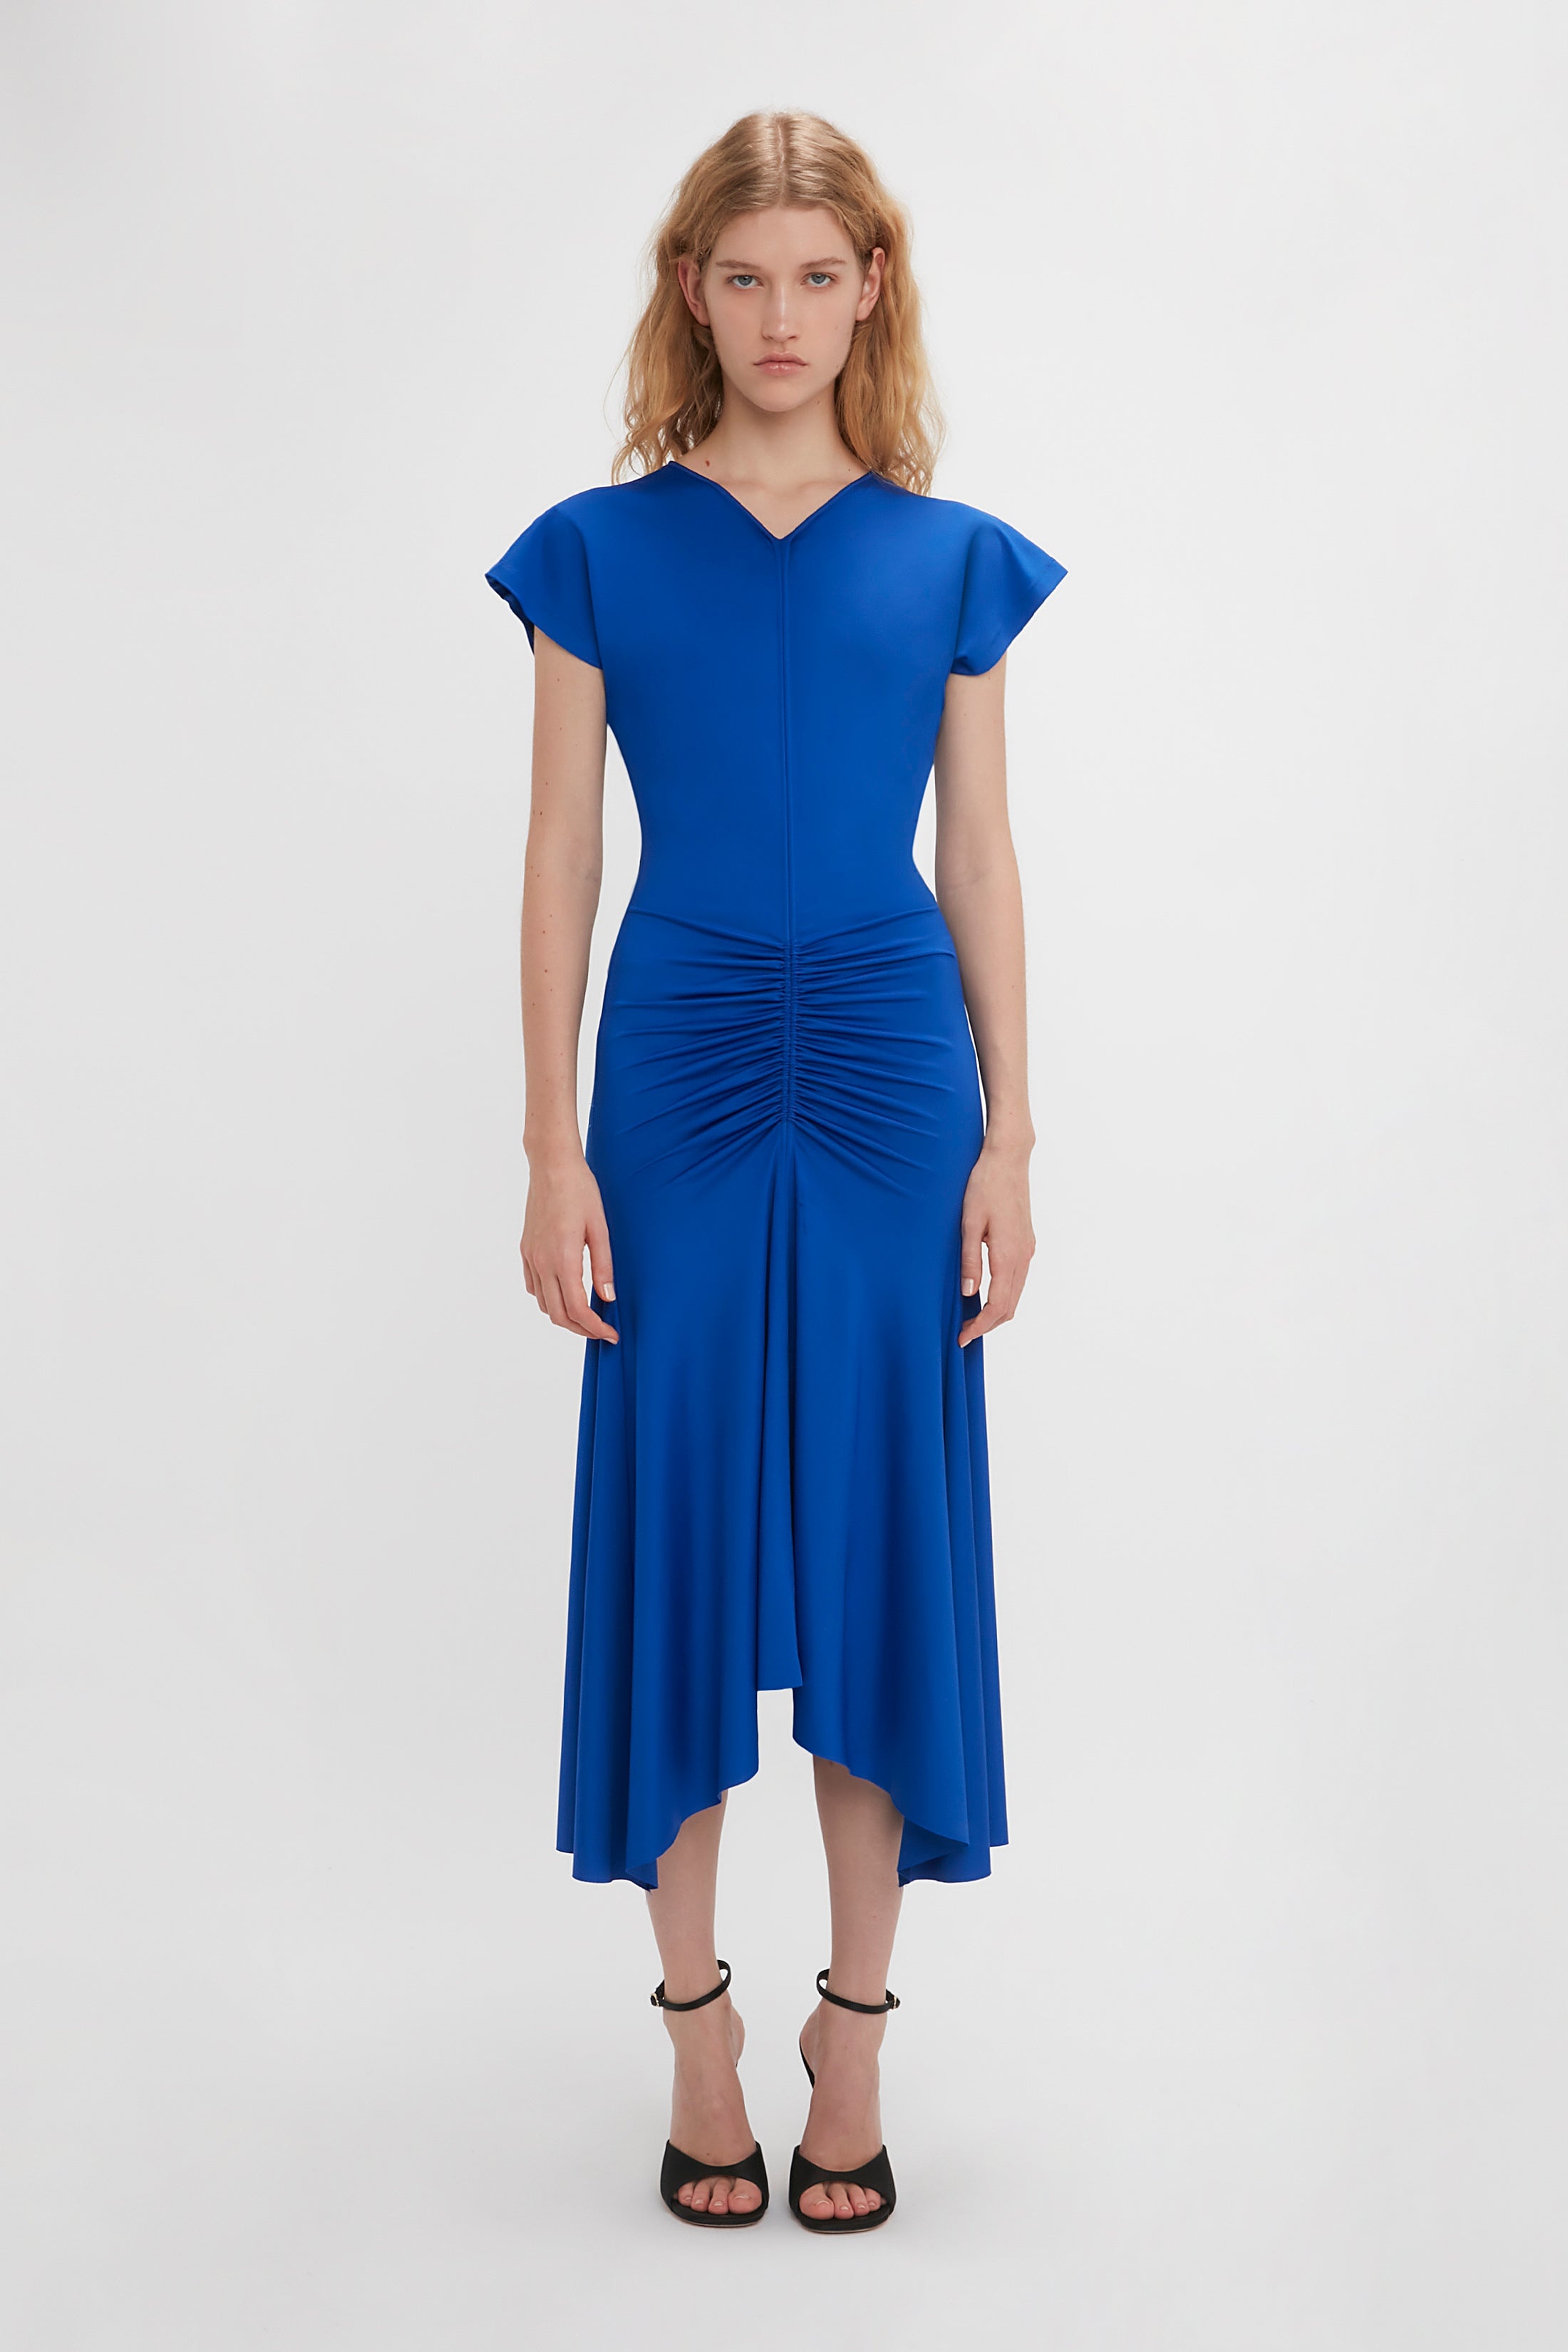 Sleeveless Rouched Jersey Dress In Royal Blue - 2